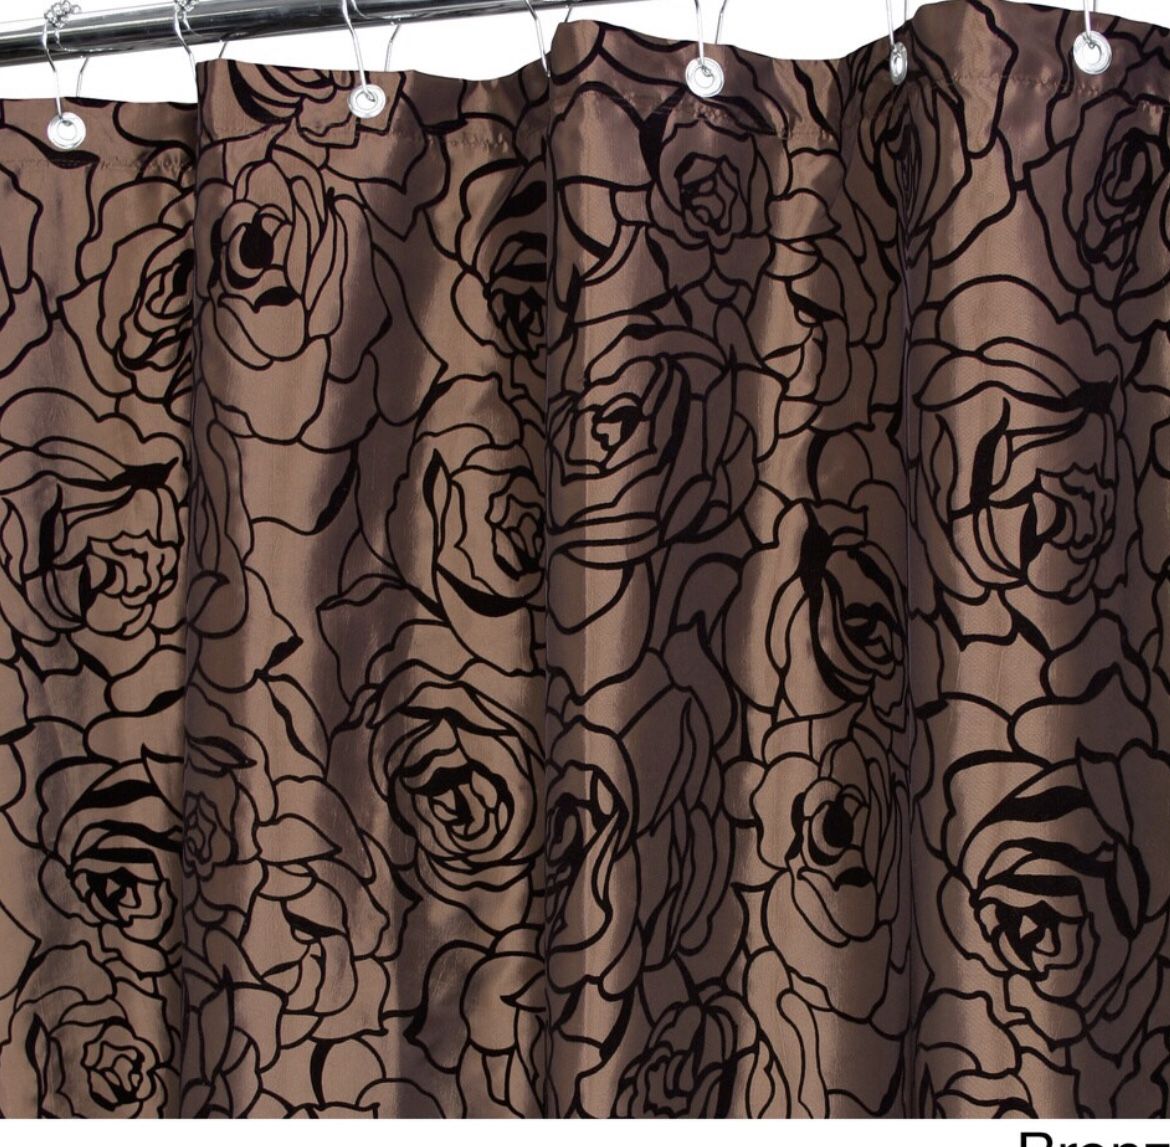 Watershed Luxury Rose Pattern Shower Curtain